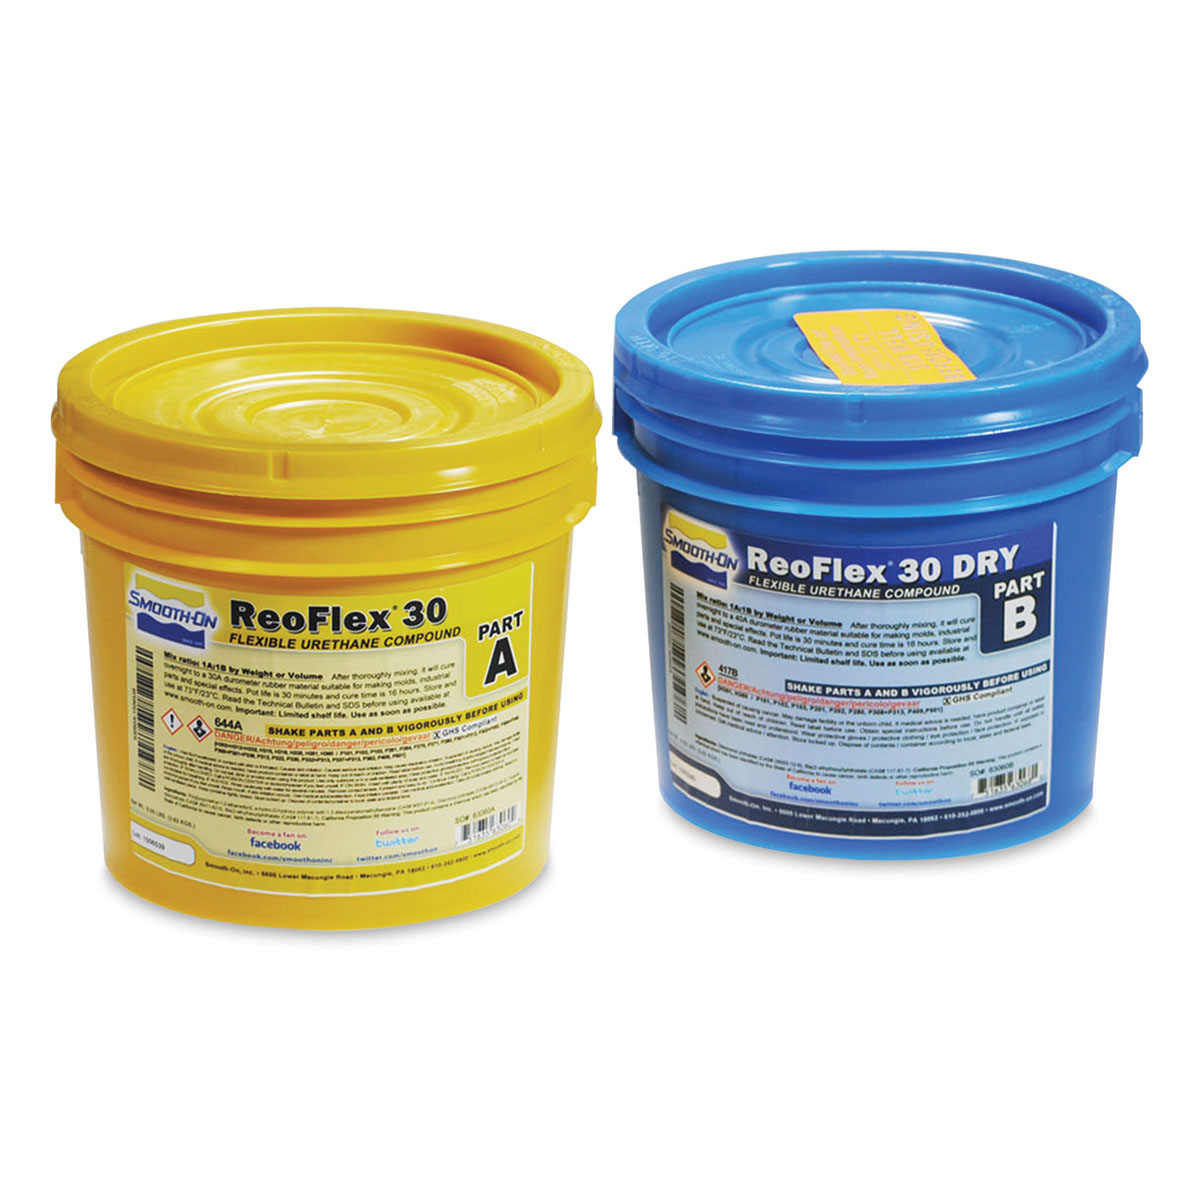 Reoflex Plastic Primer - Reoflex offers a wide range of high-quality  automotive refinishing products.